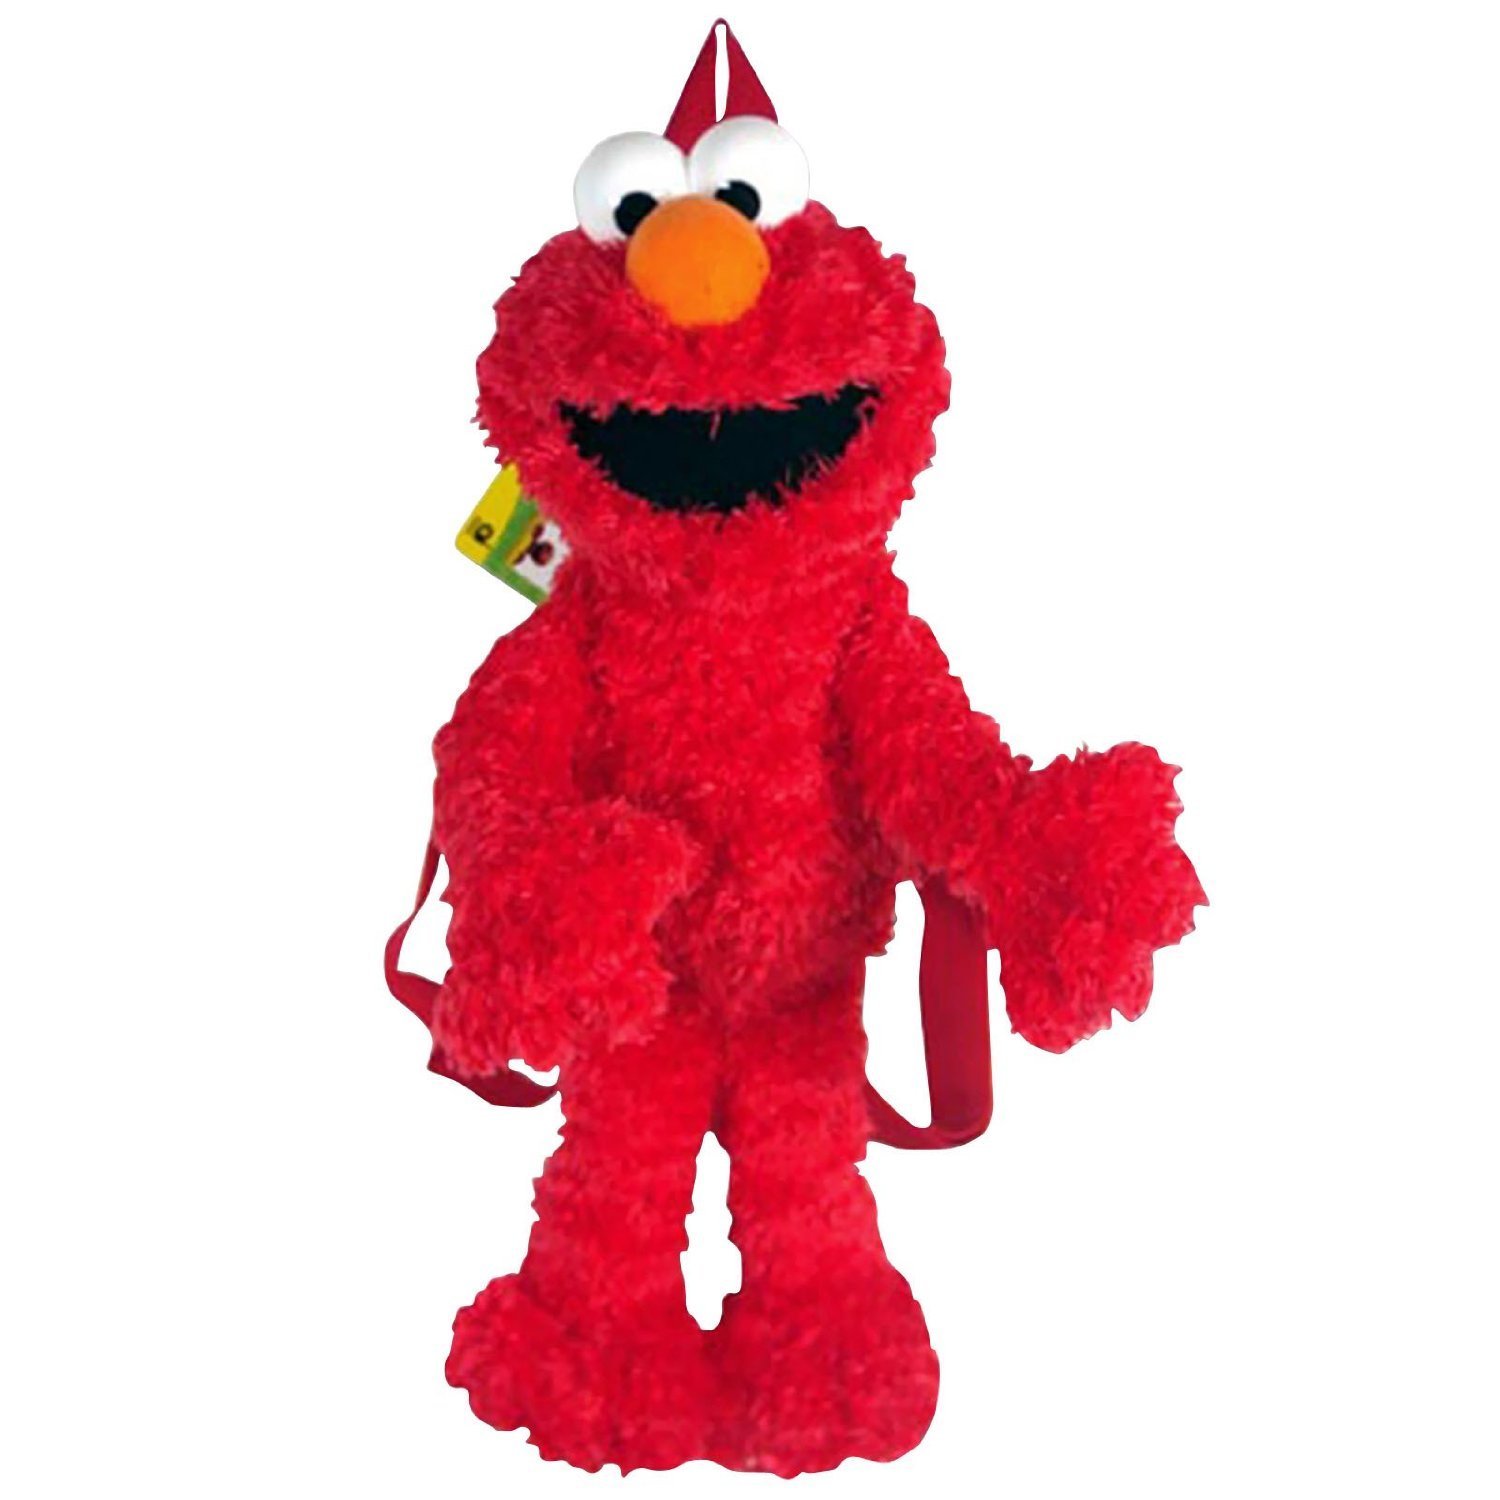 Gift Ideas For Kids Crazy About Elmo